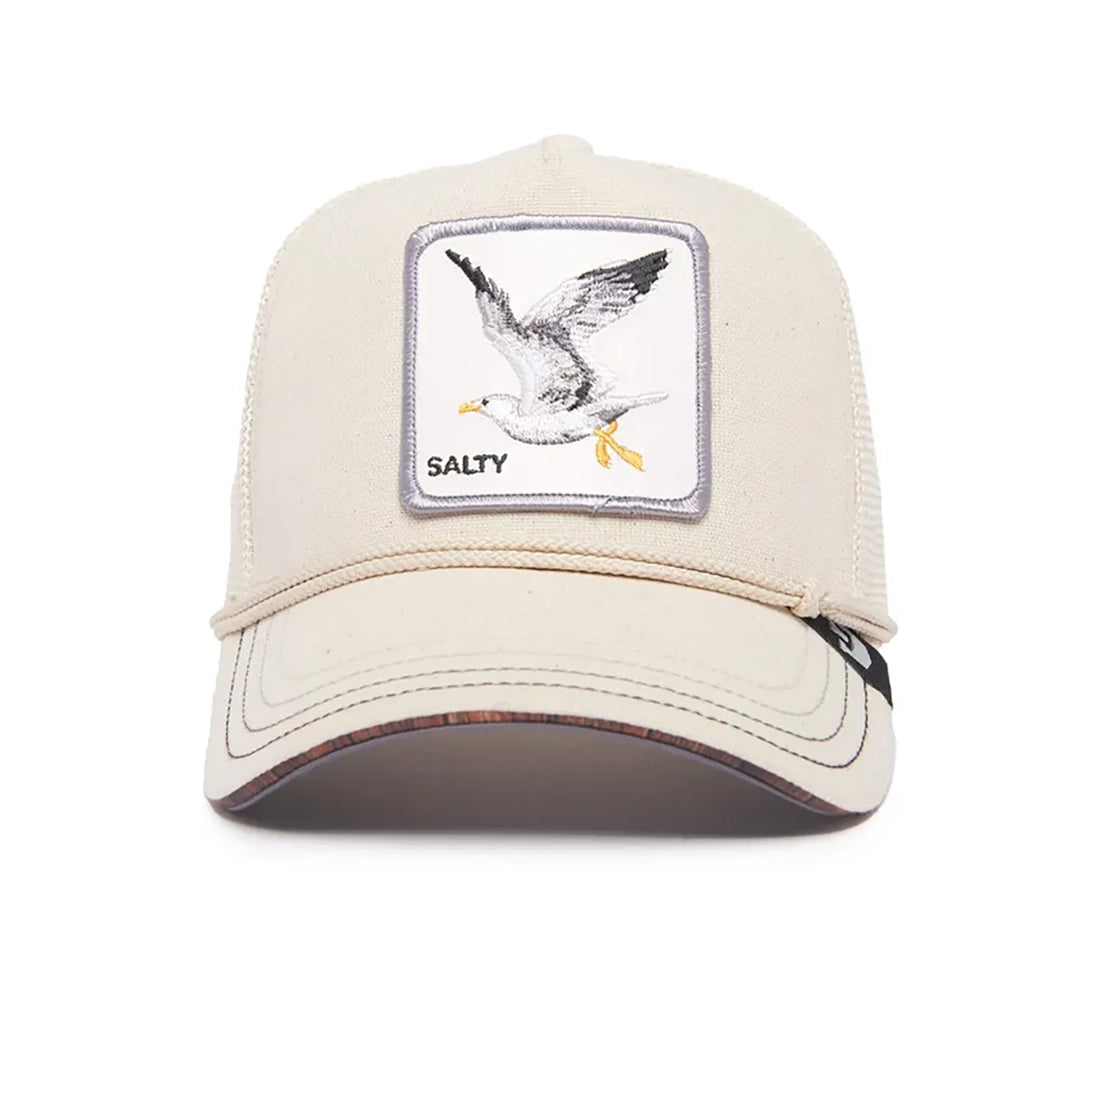 'Goorin Bros. Meal Ticket Trucker Hat' in 'Natural' colour